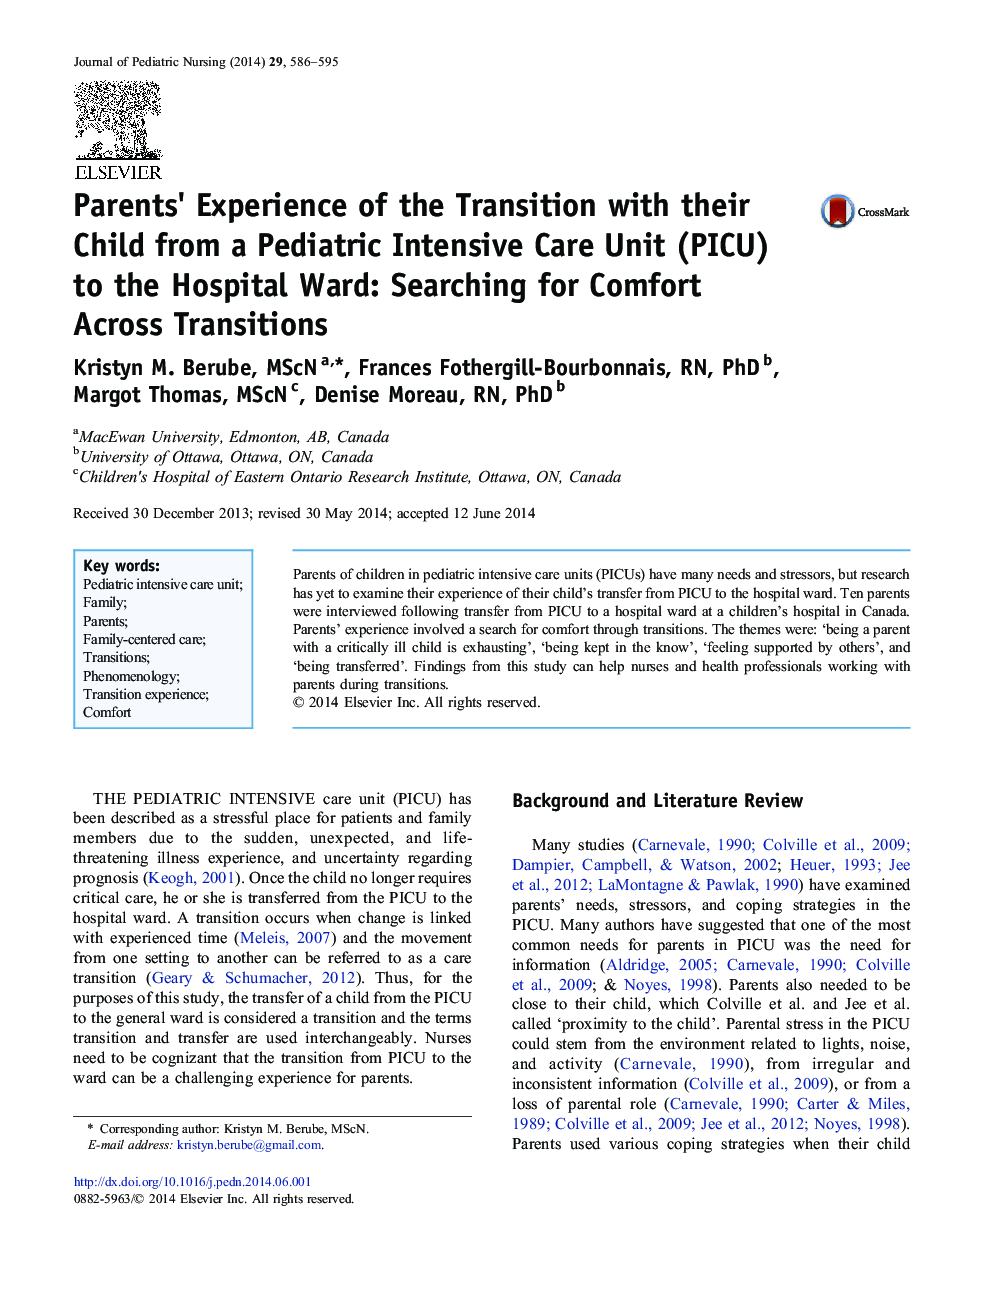 Parents' Experience of the Transition with their Child from a Pediatric Intensive Care Unit (PICU) to the Hospital Ward: Searching for Comfort Across Transitions